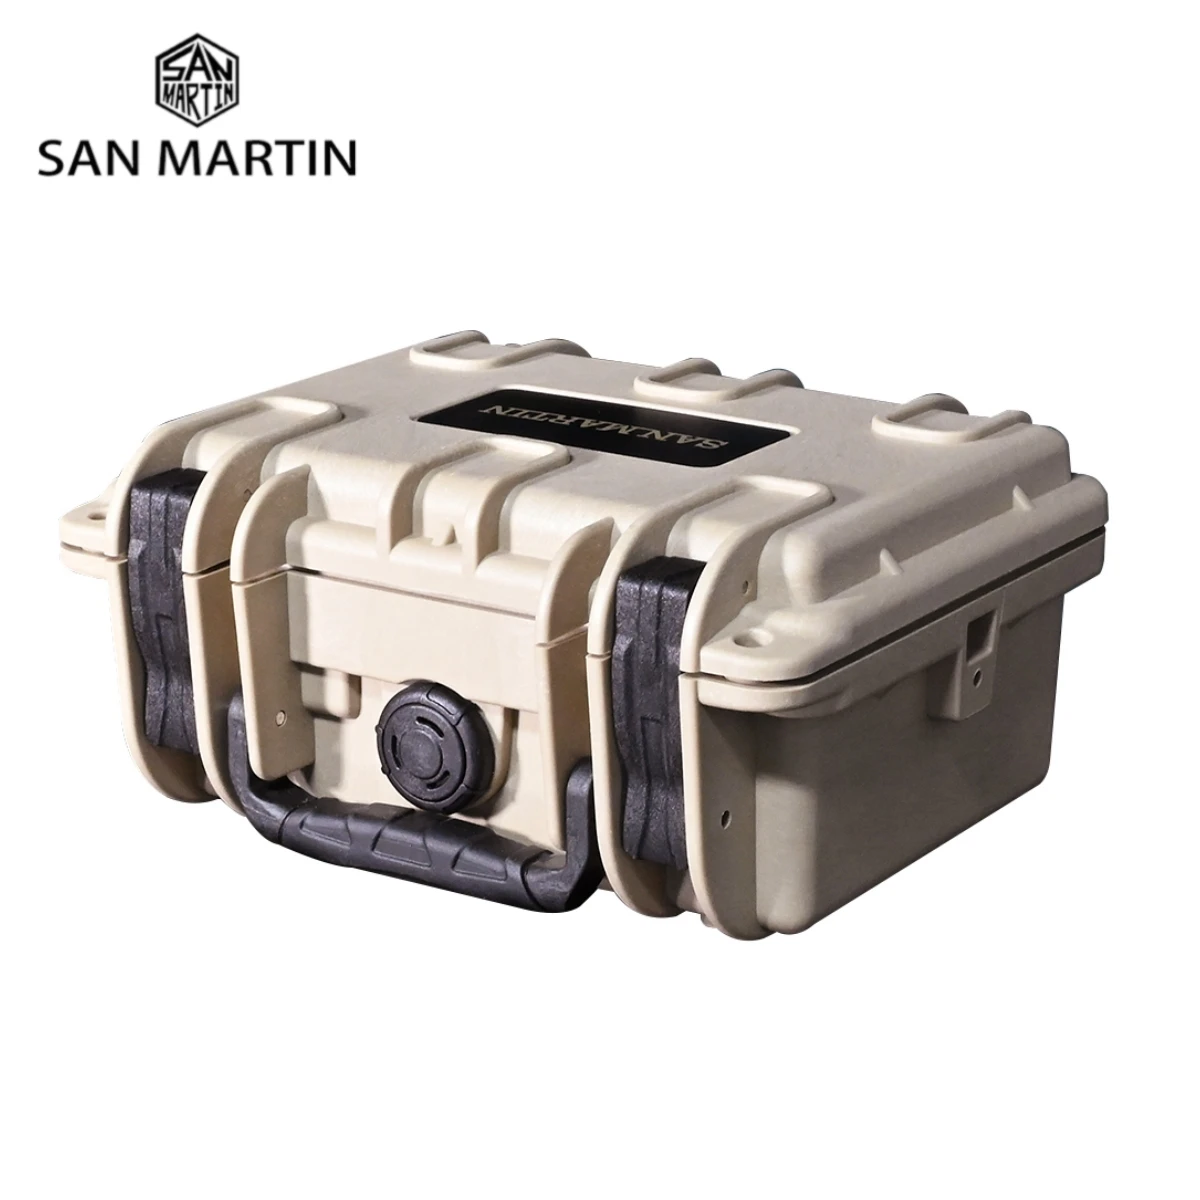 San Martin One Watch Box Luxury Portable Gift Travel Storage Boxes High-End Rectangle Display Case Safety Pillow Padding DIY